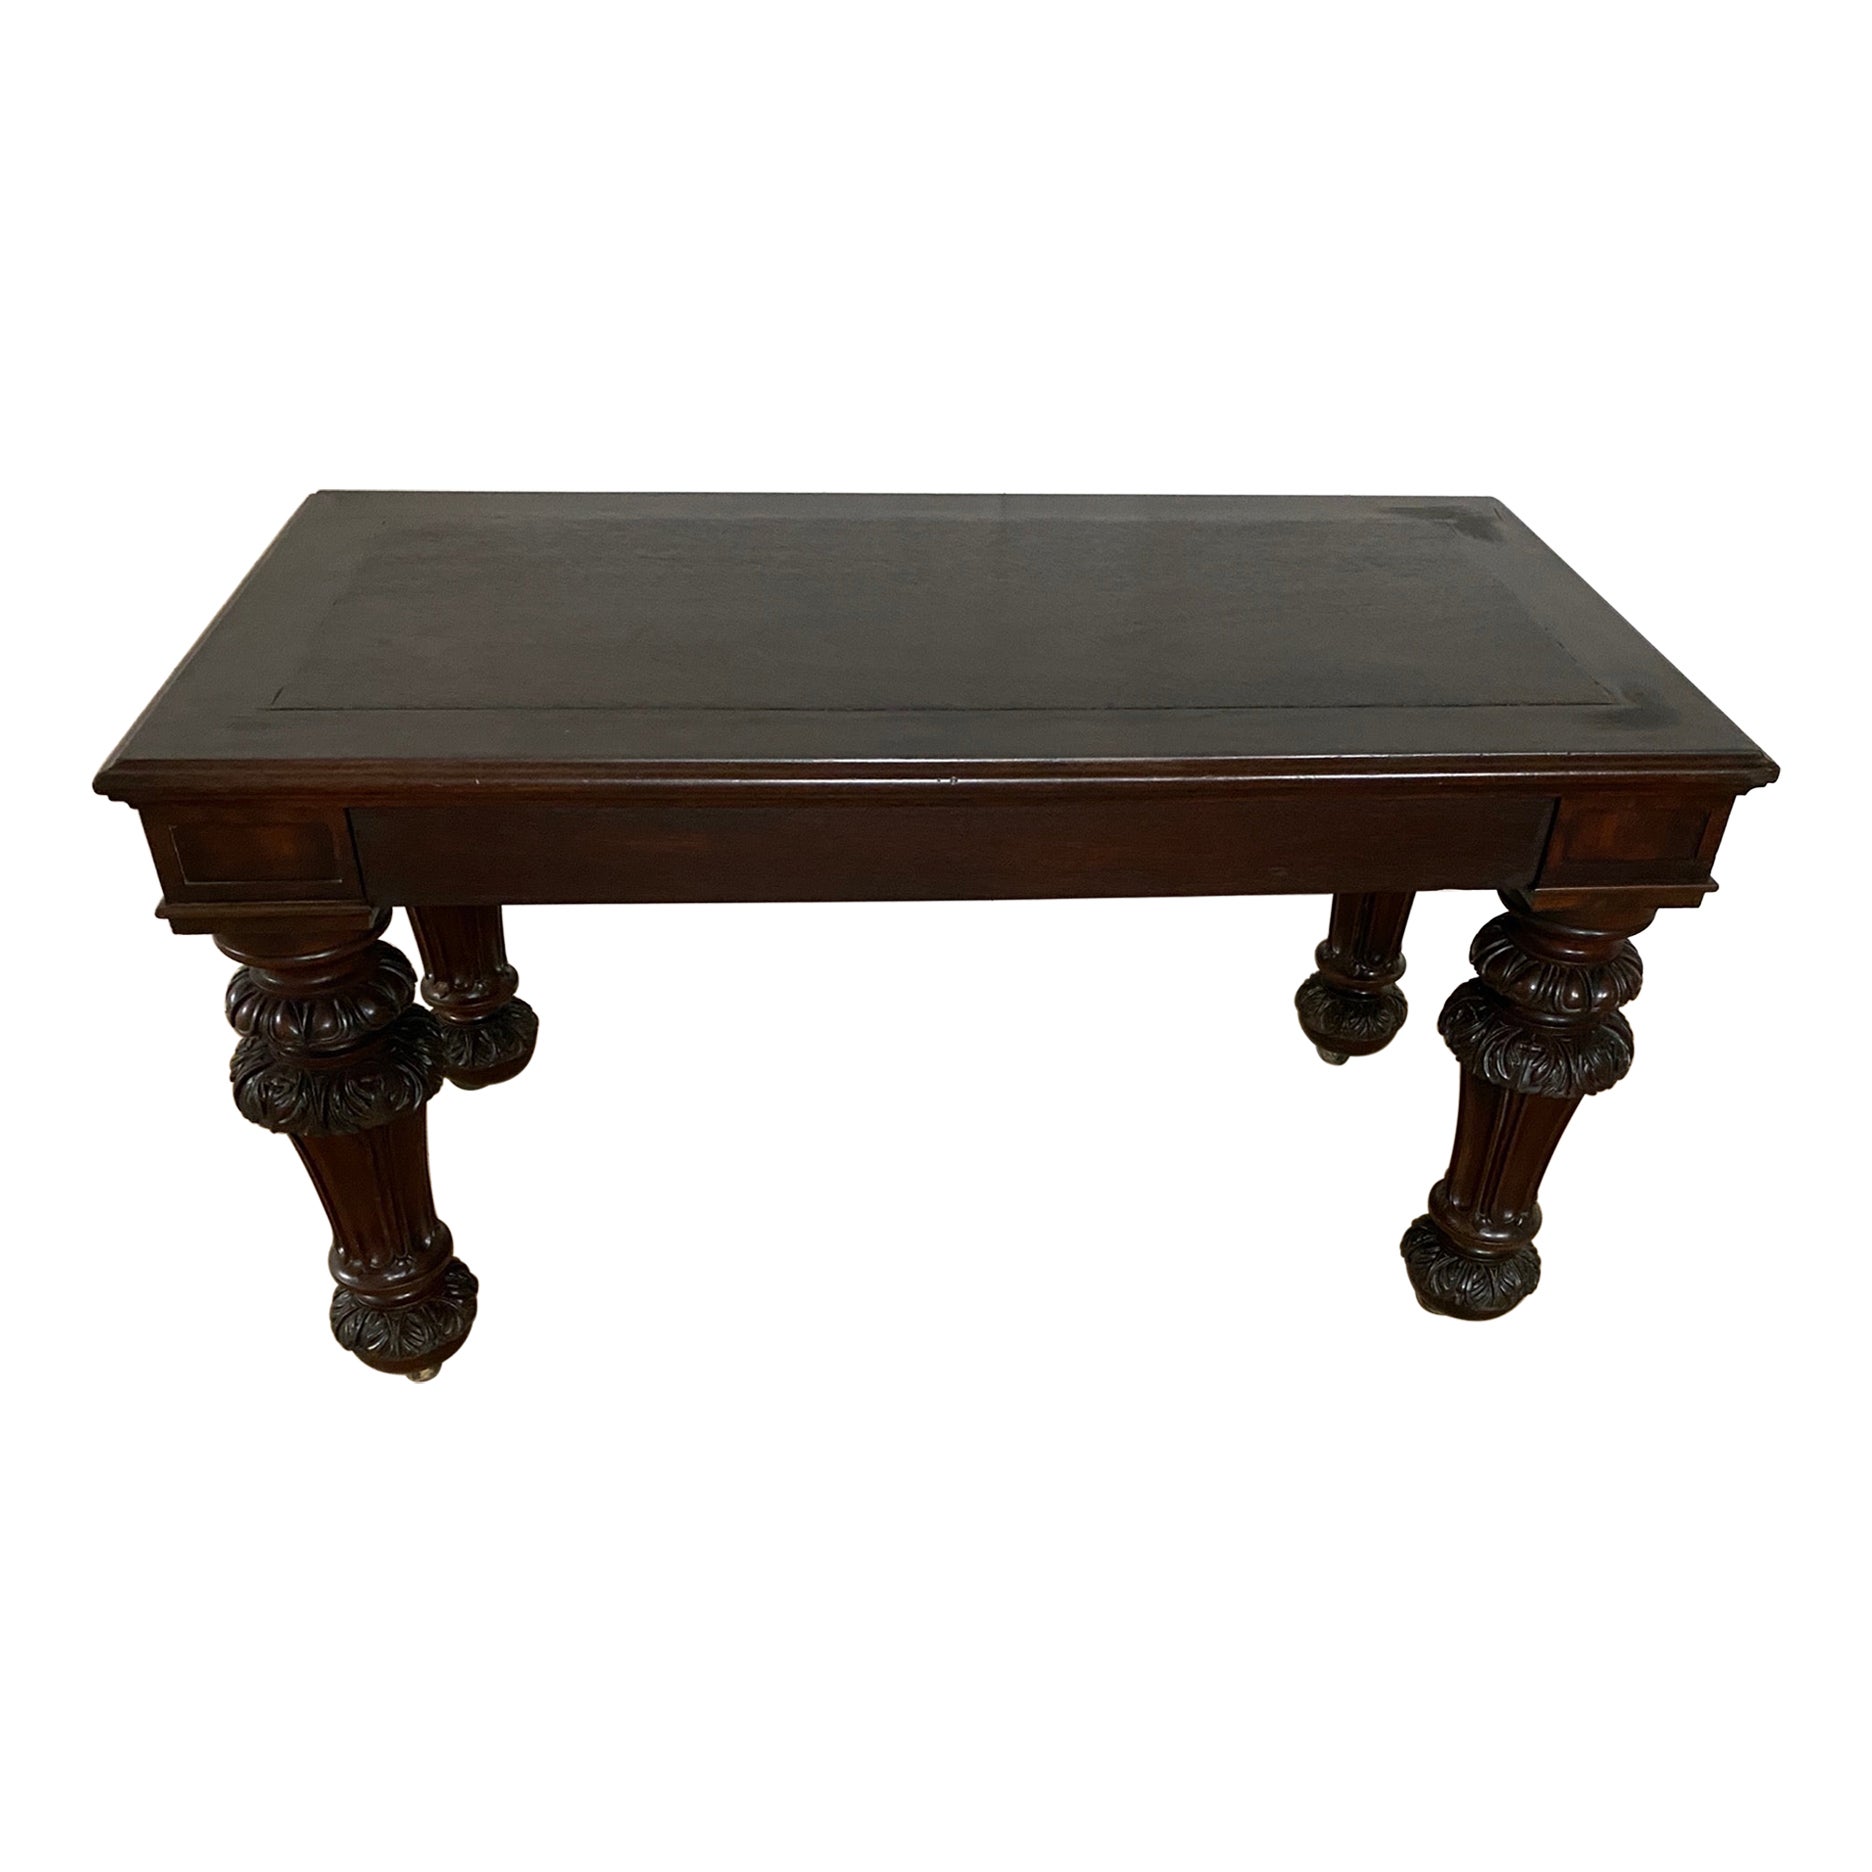 Tudor Revival Style Carved Coffee Table For Sale